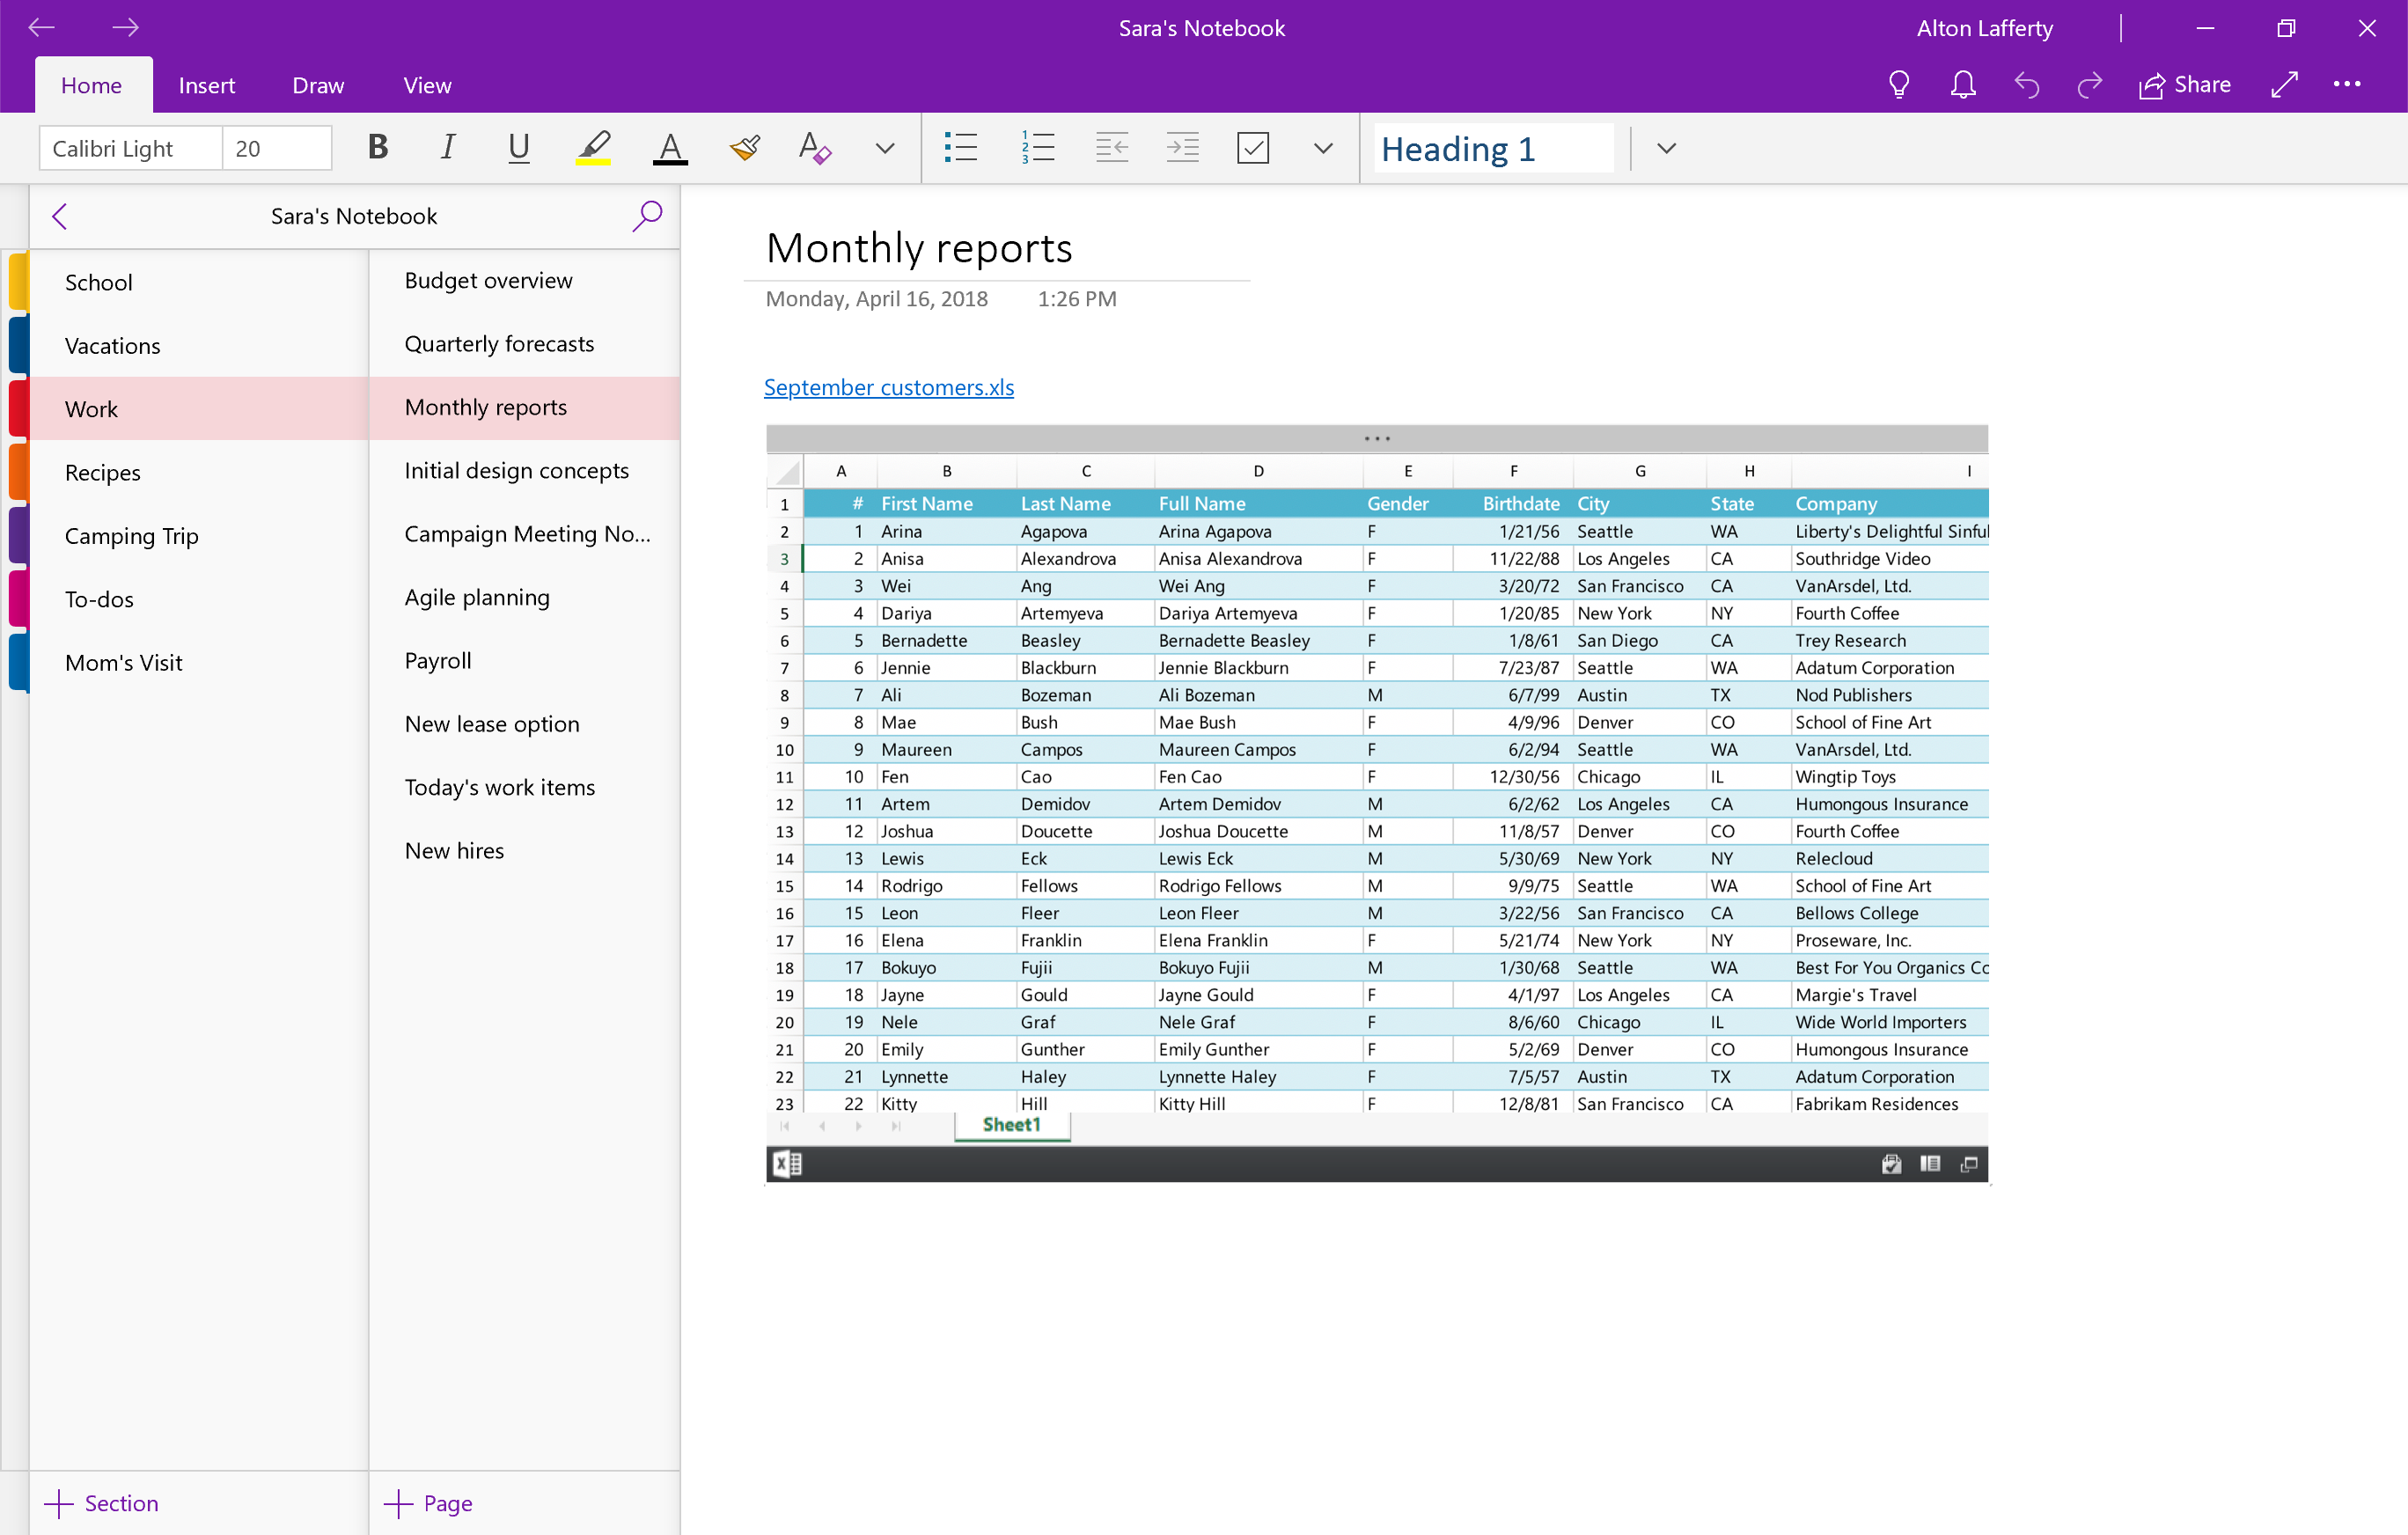 outlook 2016 for mac onenote